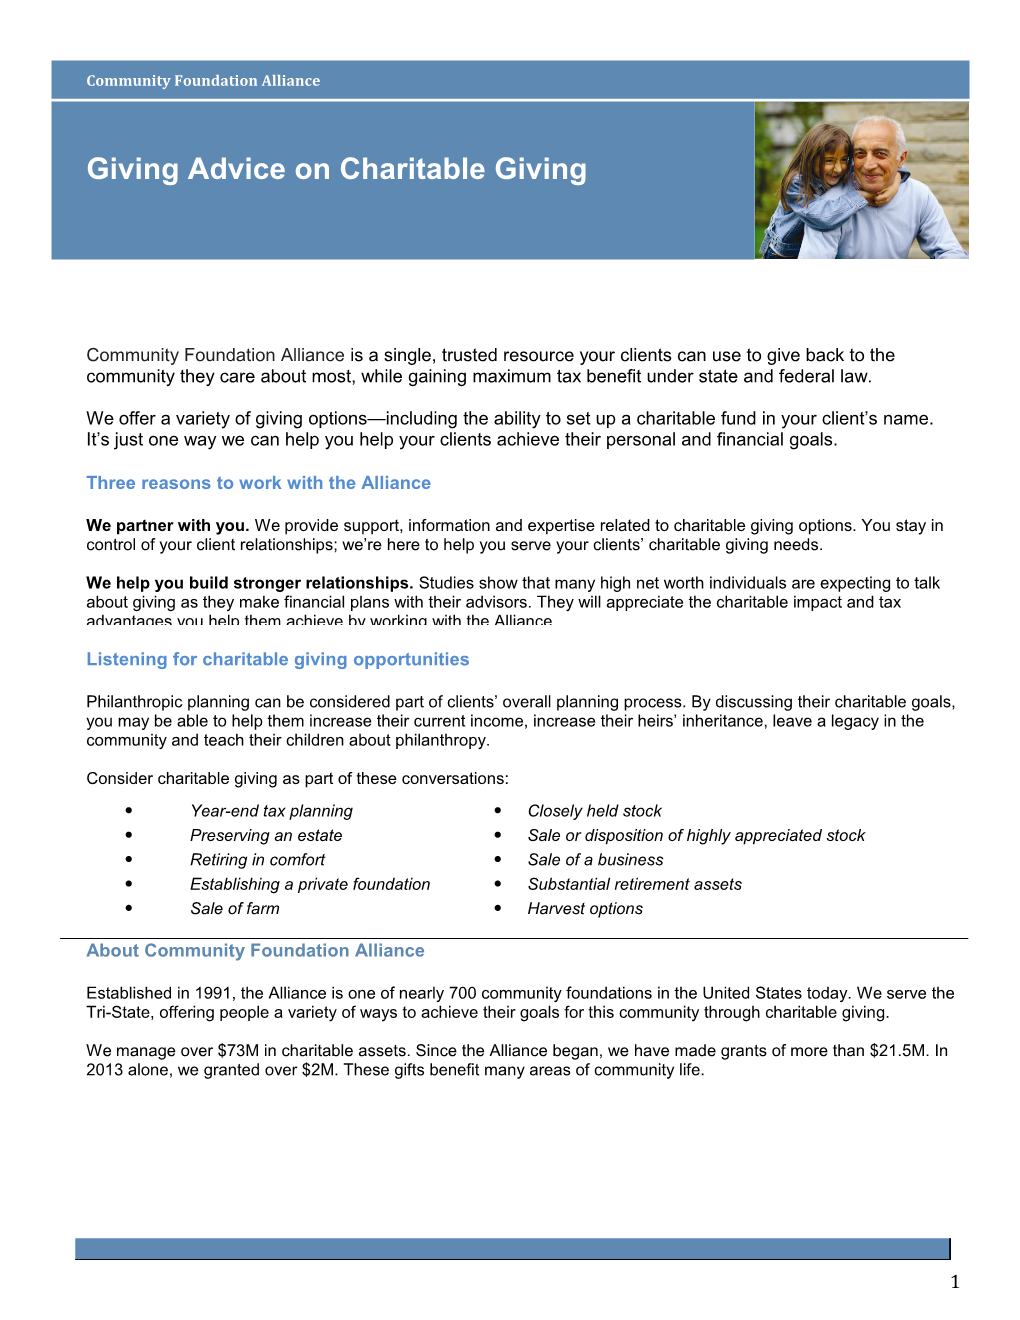 Giving Advice on Charitable Giving